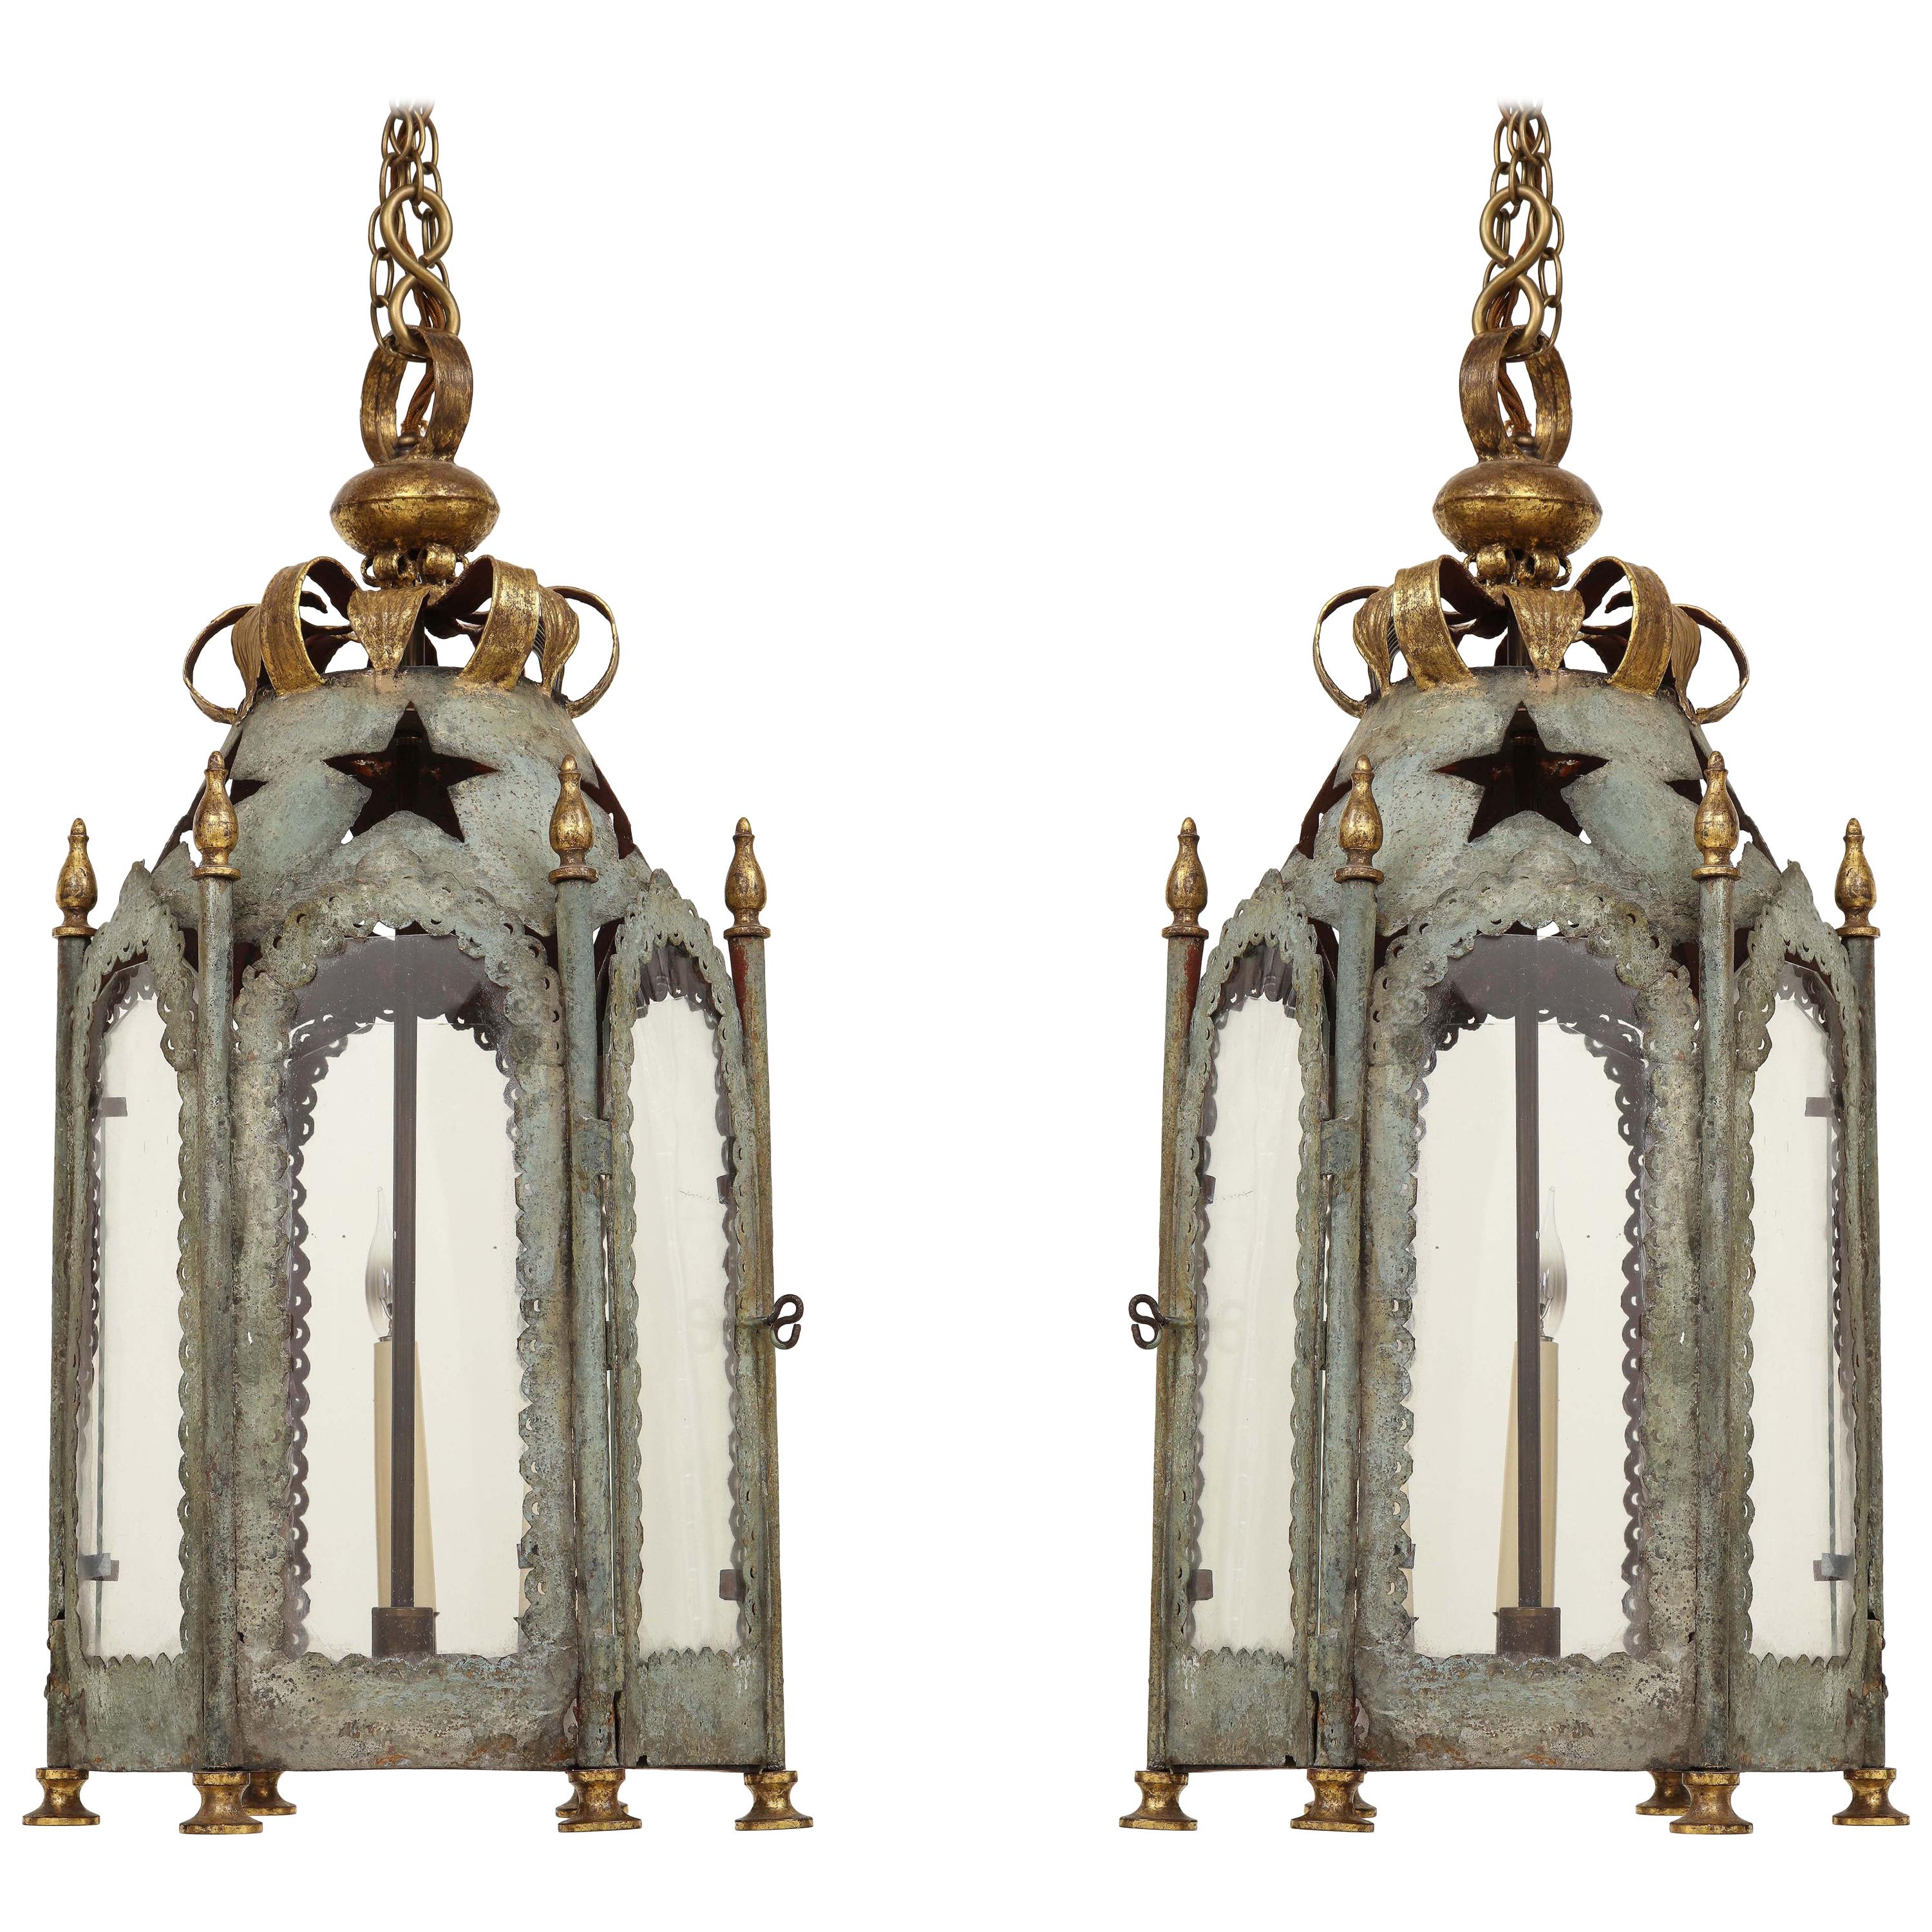 Pair of Colefax & Fowler Silvered Tôle and Gilt Hexagonal Lanterns